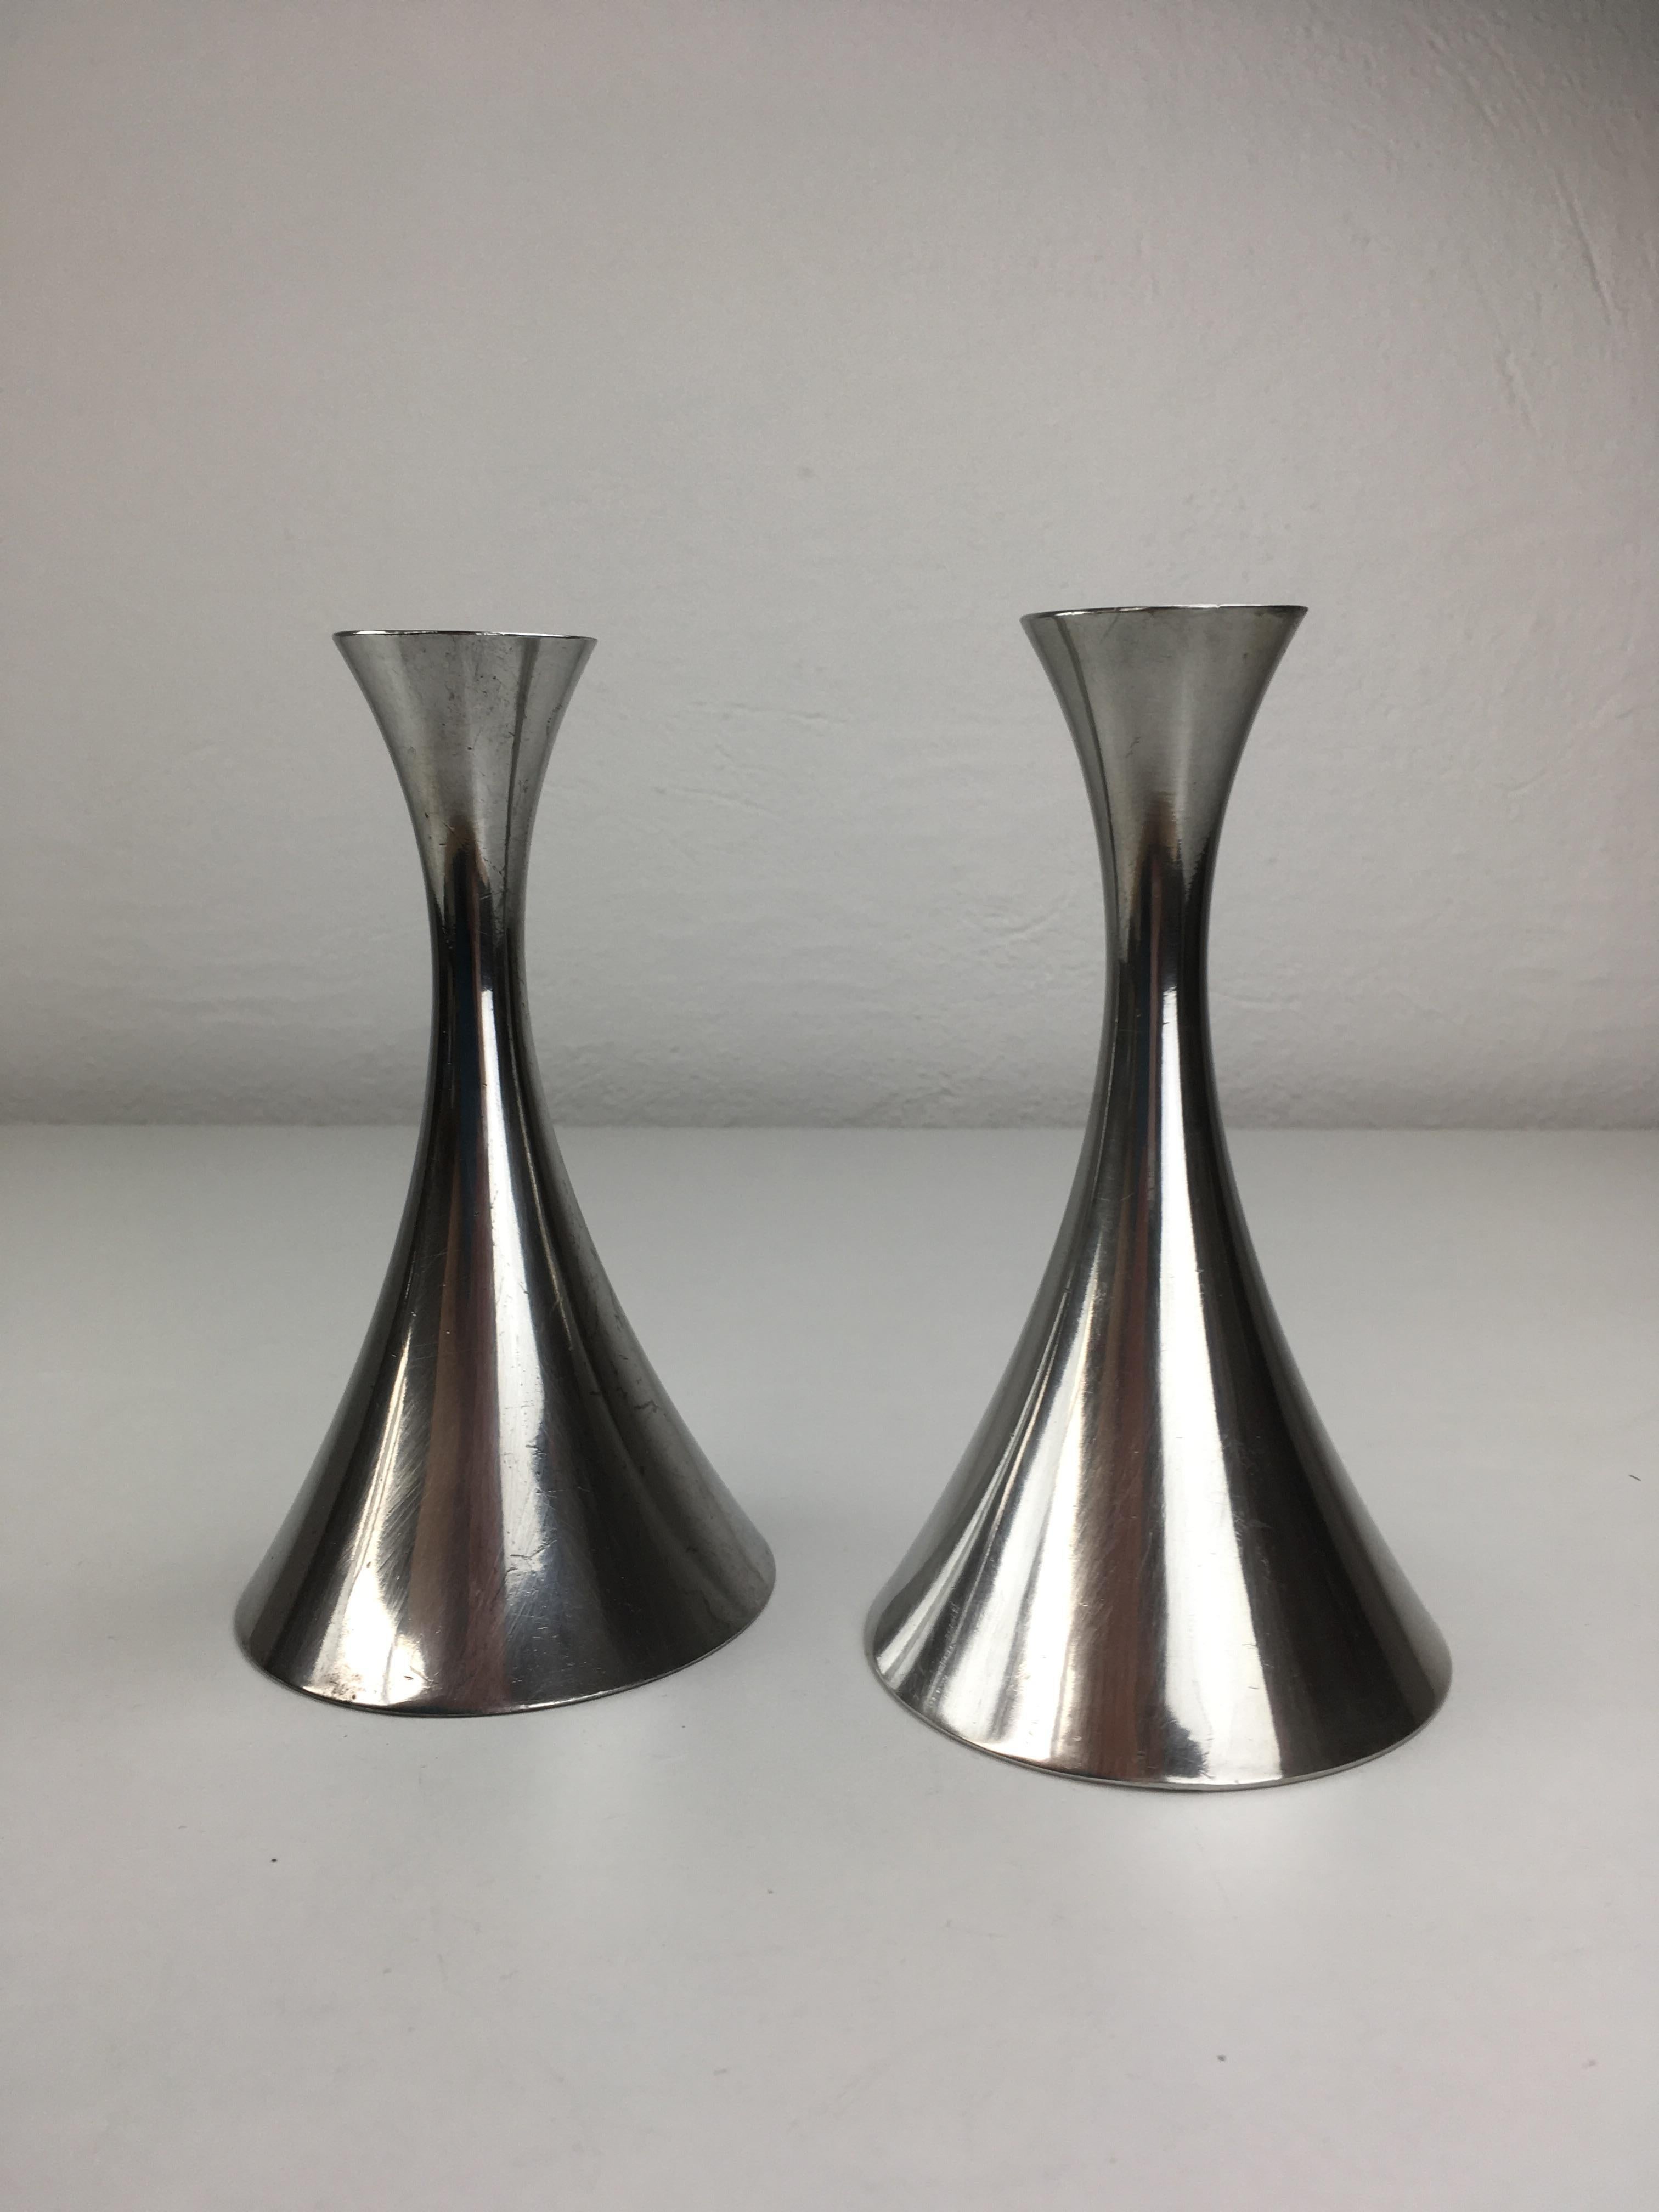 Set of two Danish Just Andersen art deco pewter candle holders produced by Just Andersen A/S in the 1930's.

The candle holders are in good vintage condition and marked with Just. Andersens triangle mark. 

Just Andersen 1884-1943 was born in